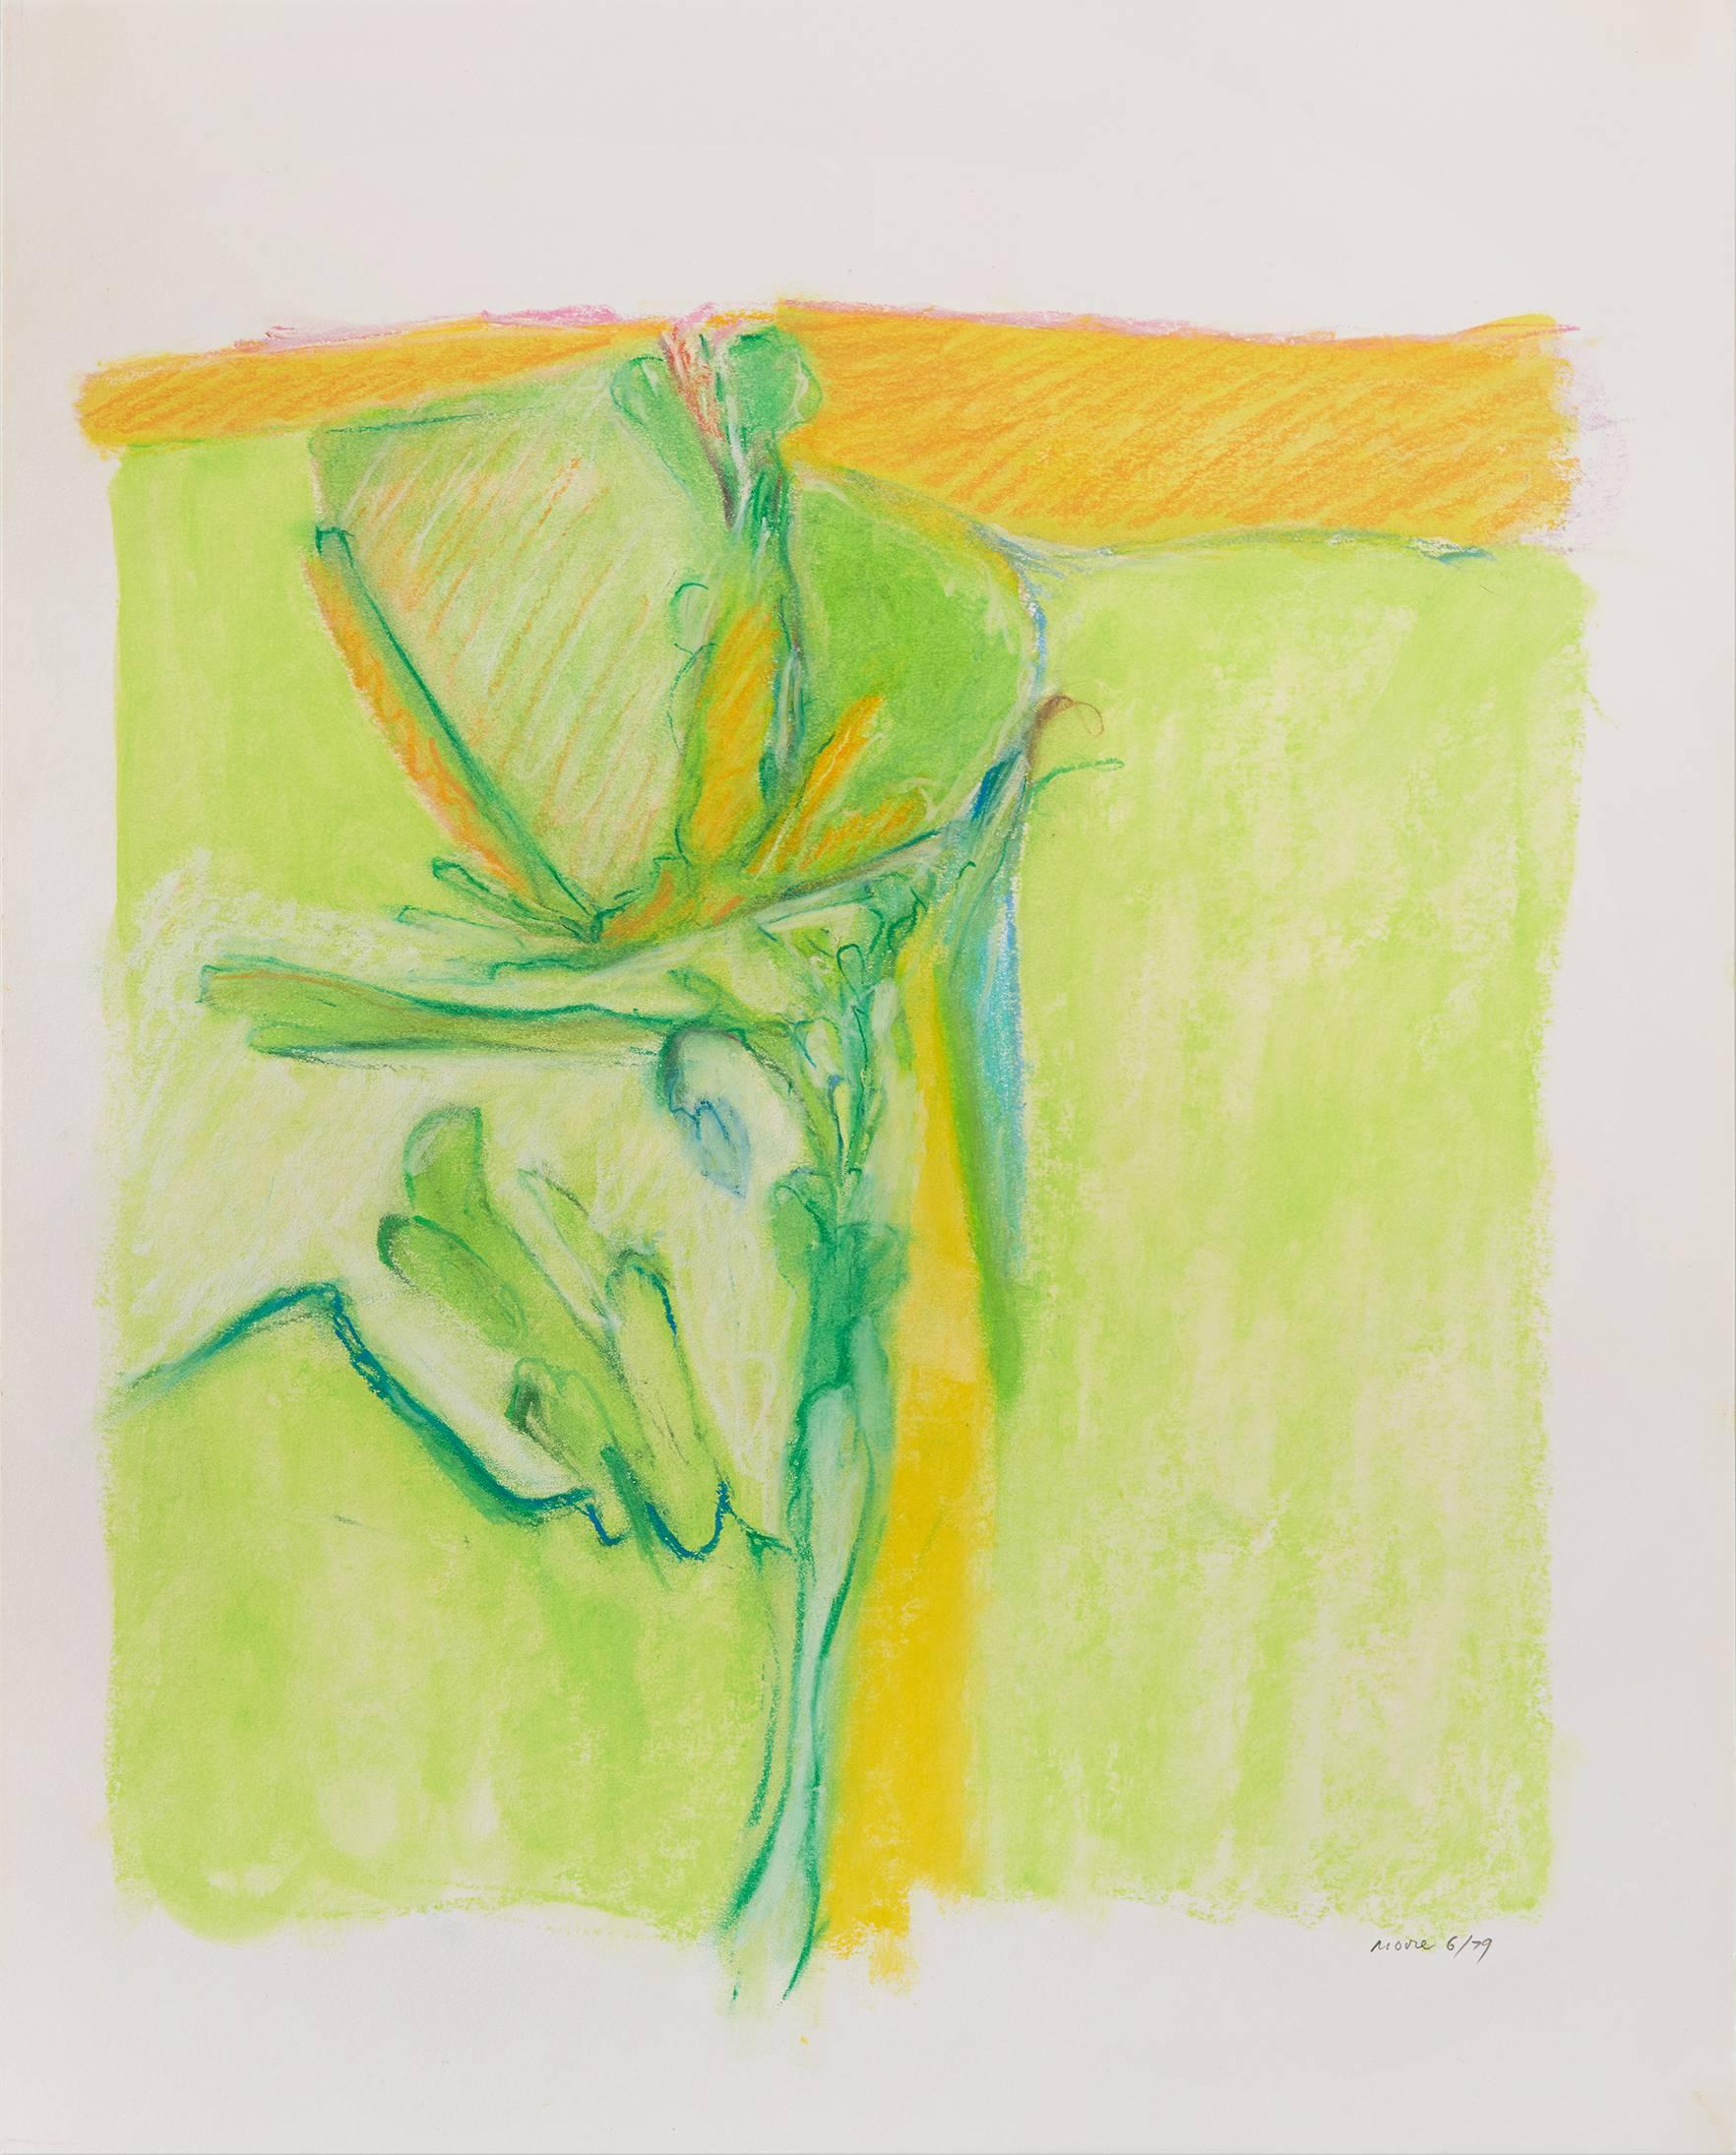 James Moore Abstract Drawing - Untitled II (green yellow), pastel on paper, 20 x 16 inches. Bright colors